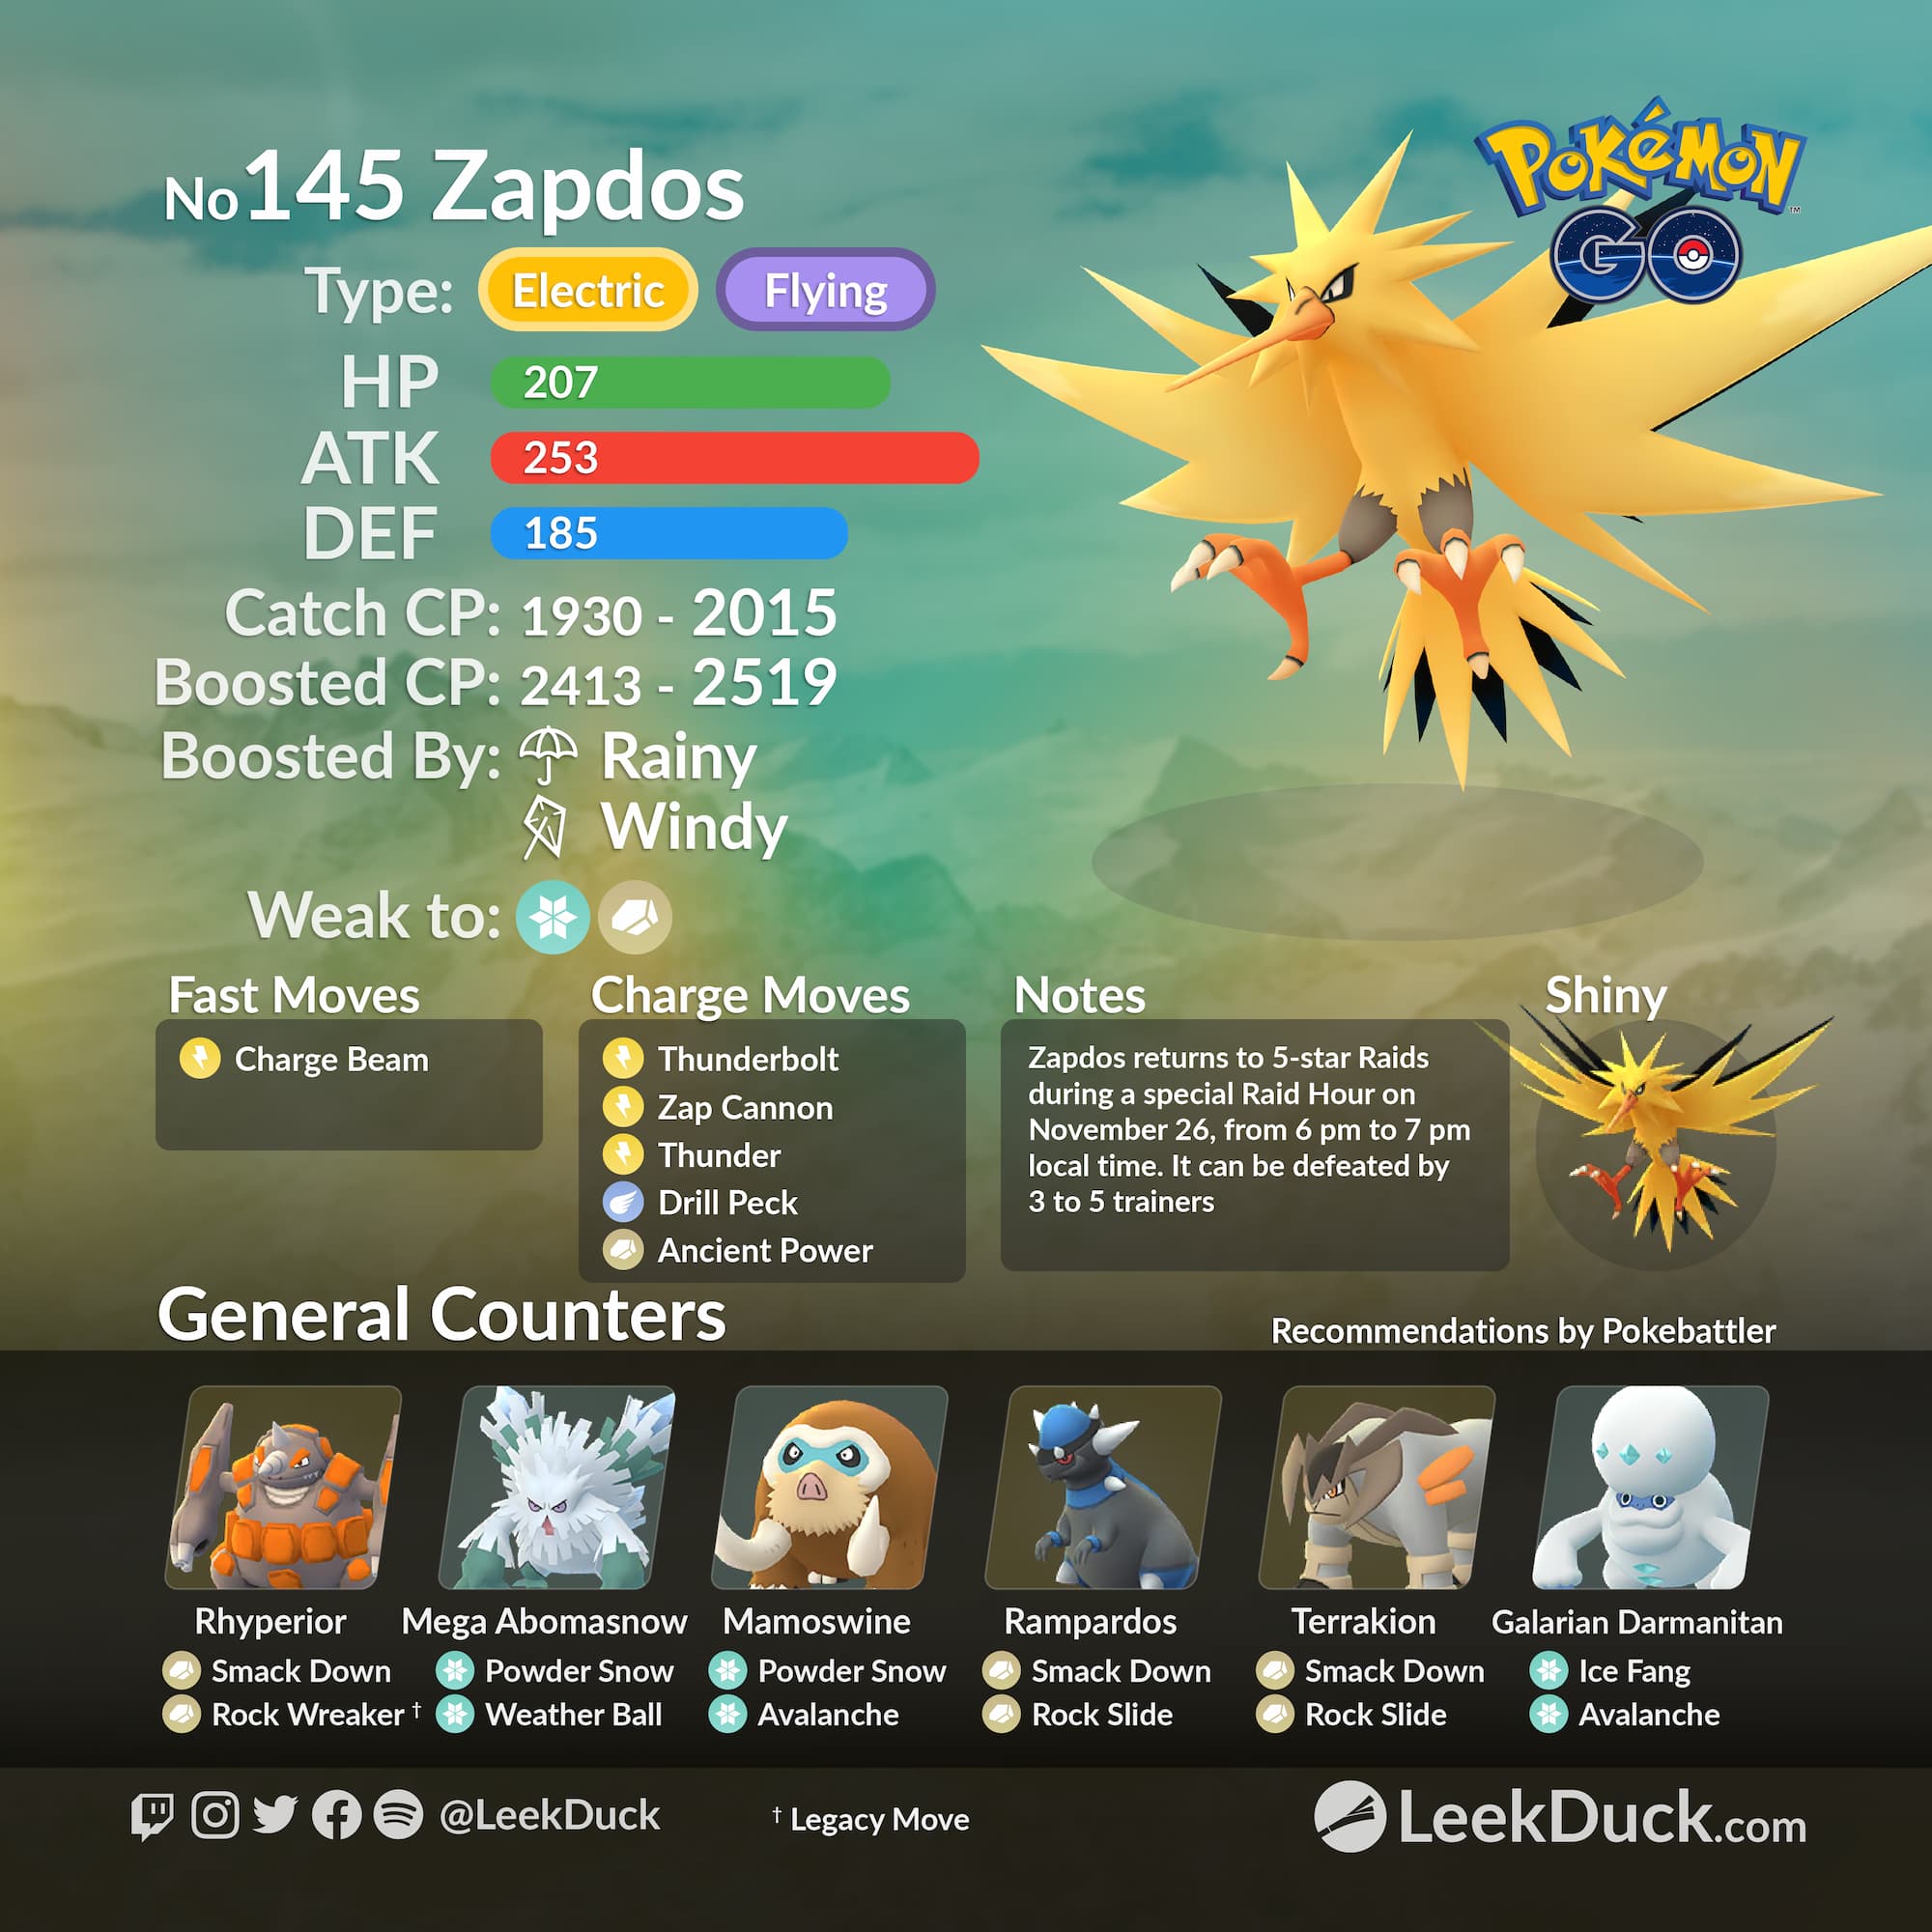 Articuno Zapdos And Moltres Raid Hour Leek Duck Pokemon Go News And Resources